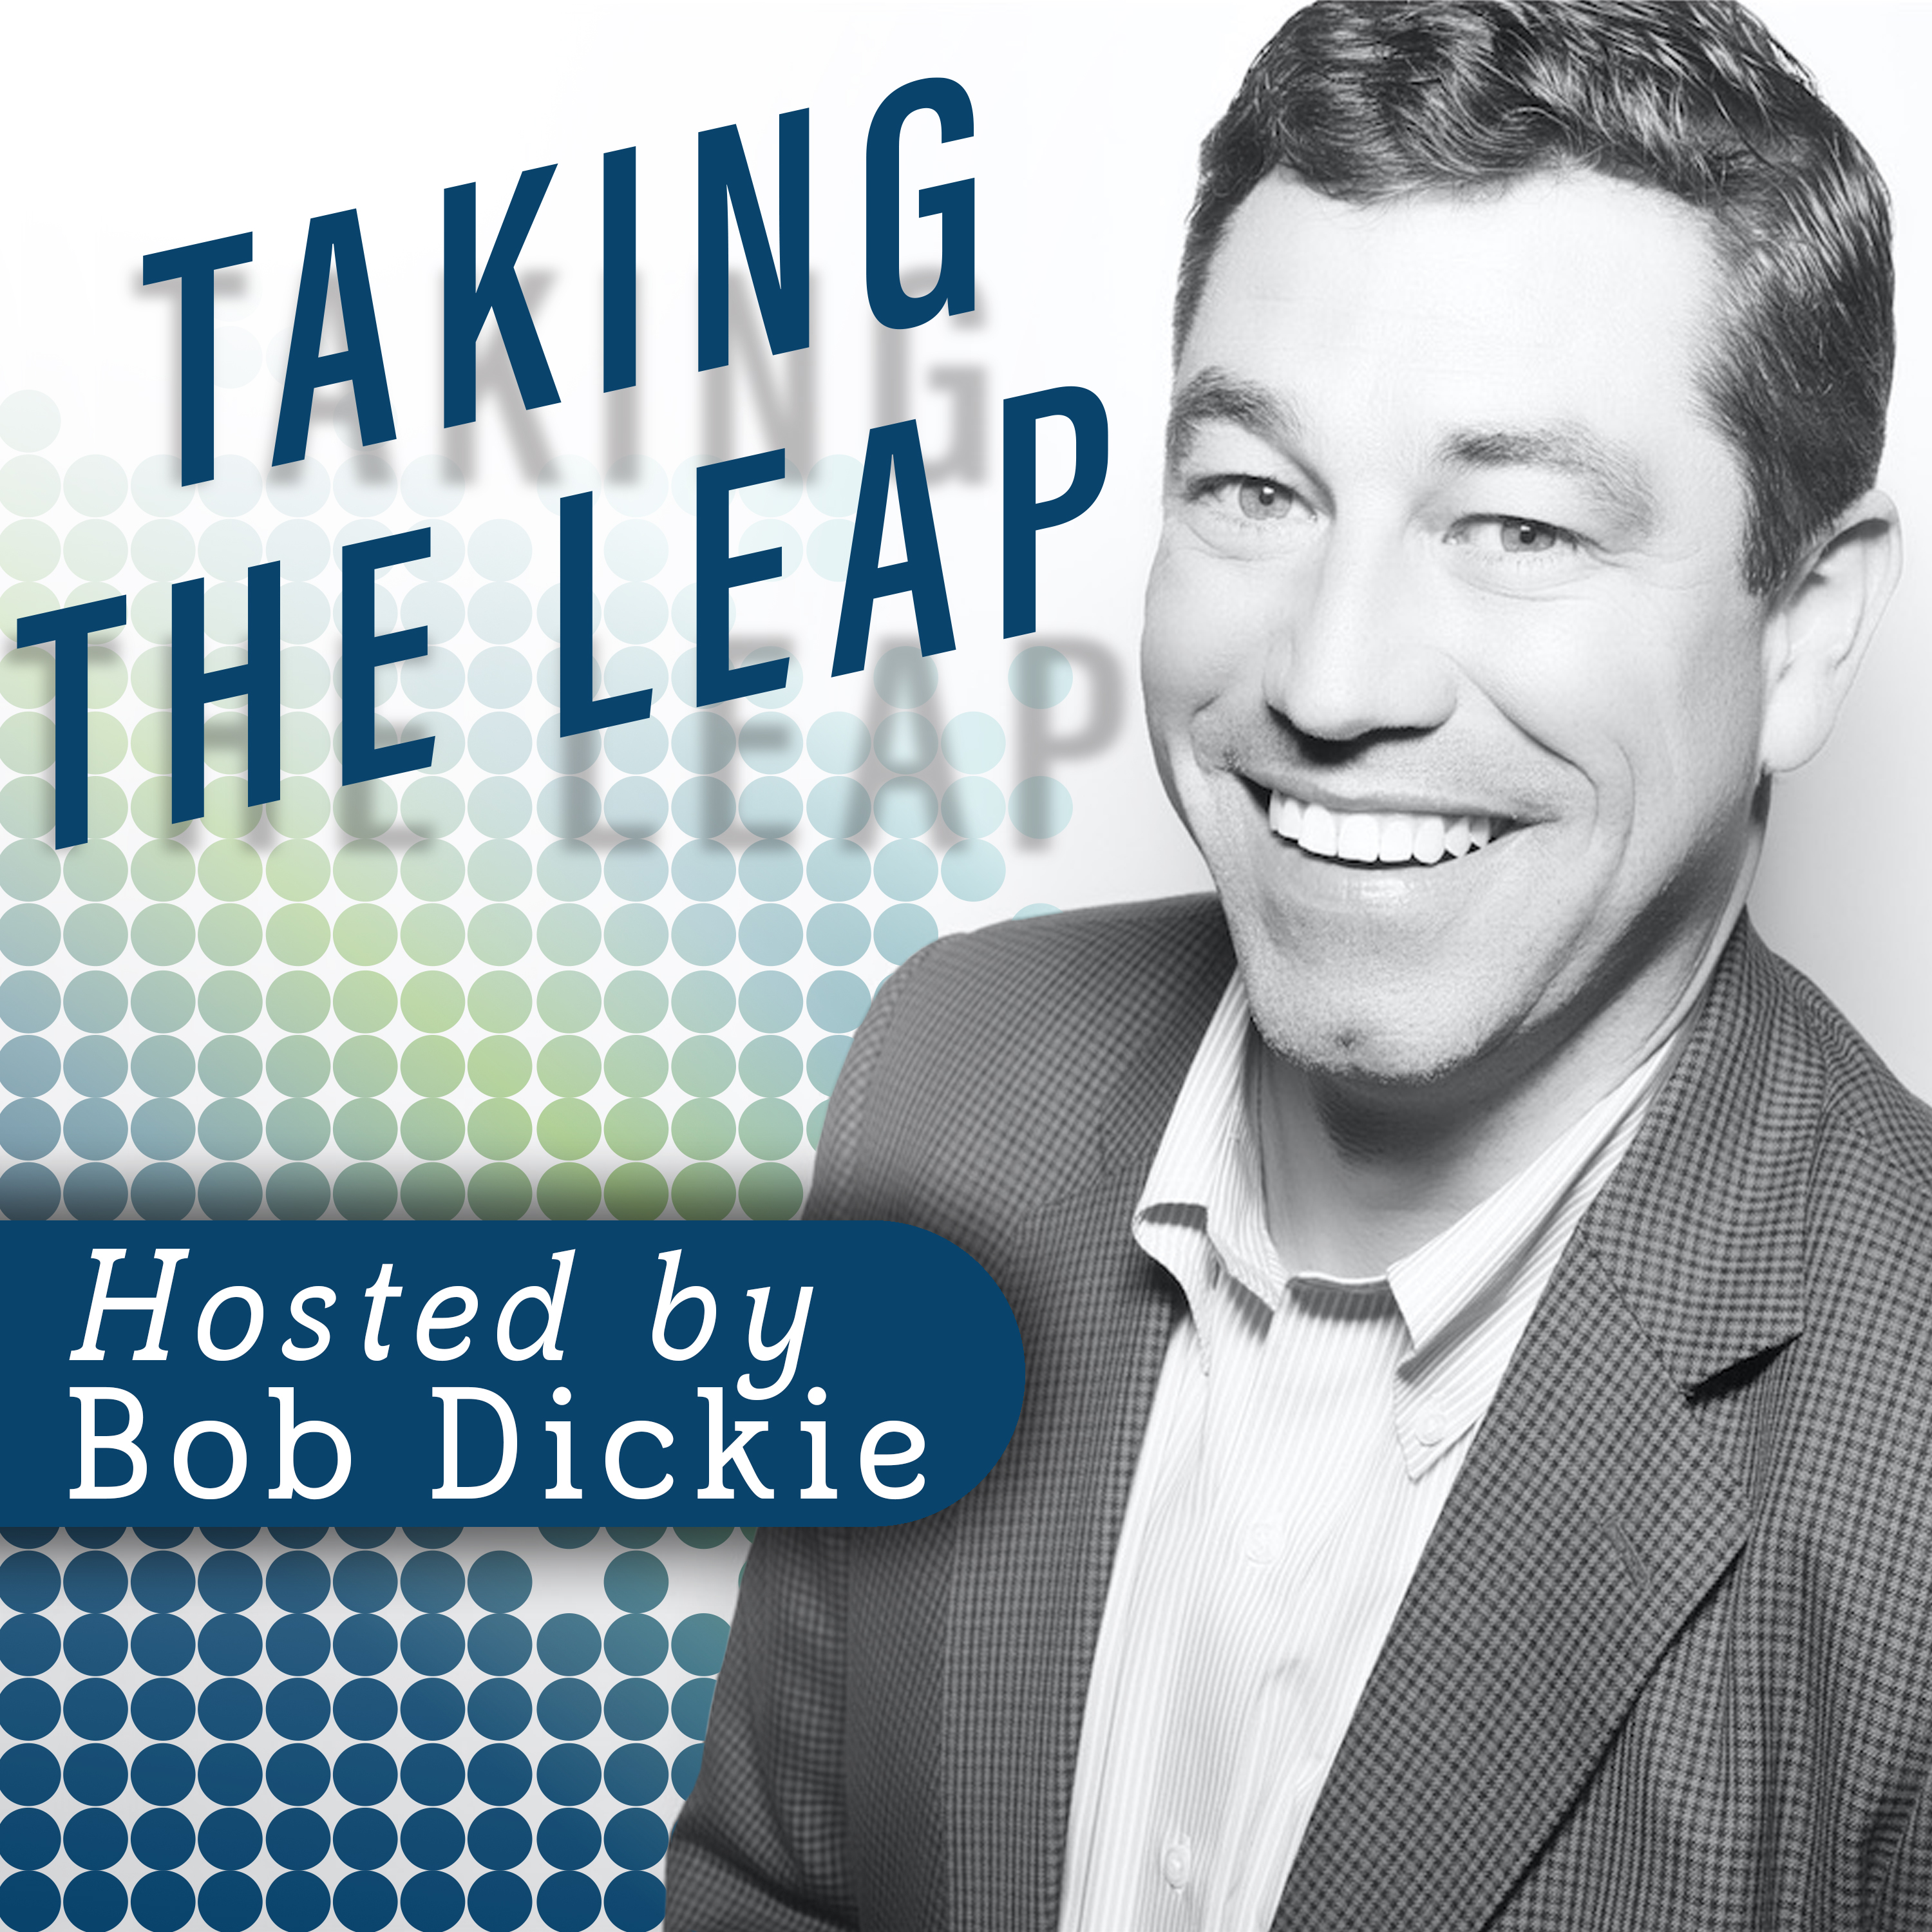 Launching a Podcast Called Taking the Leap with Robert Dickie III